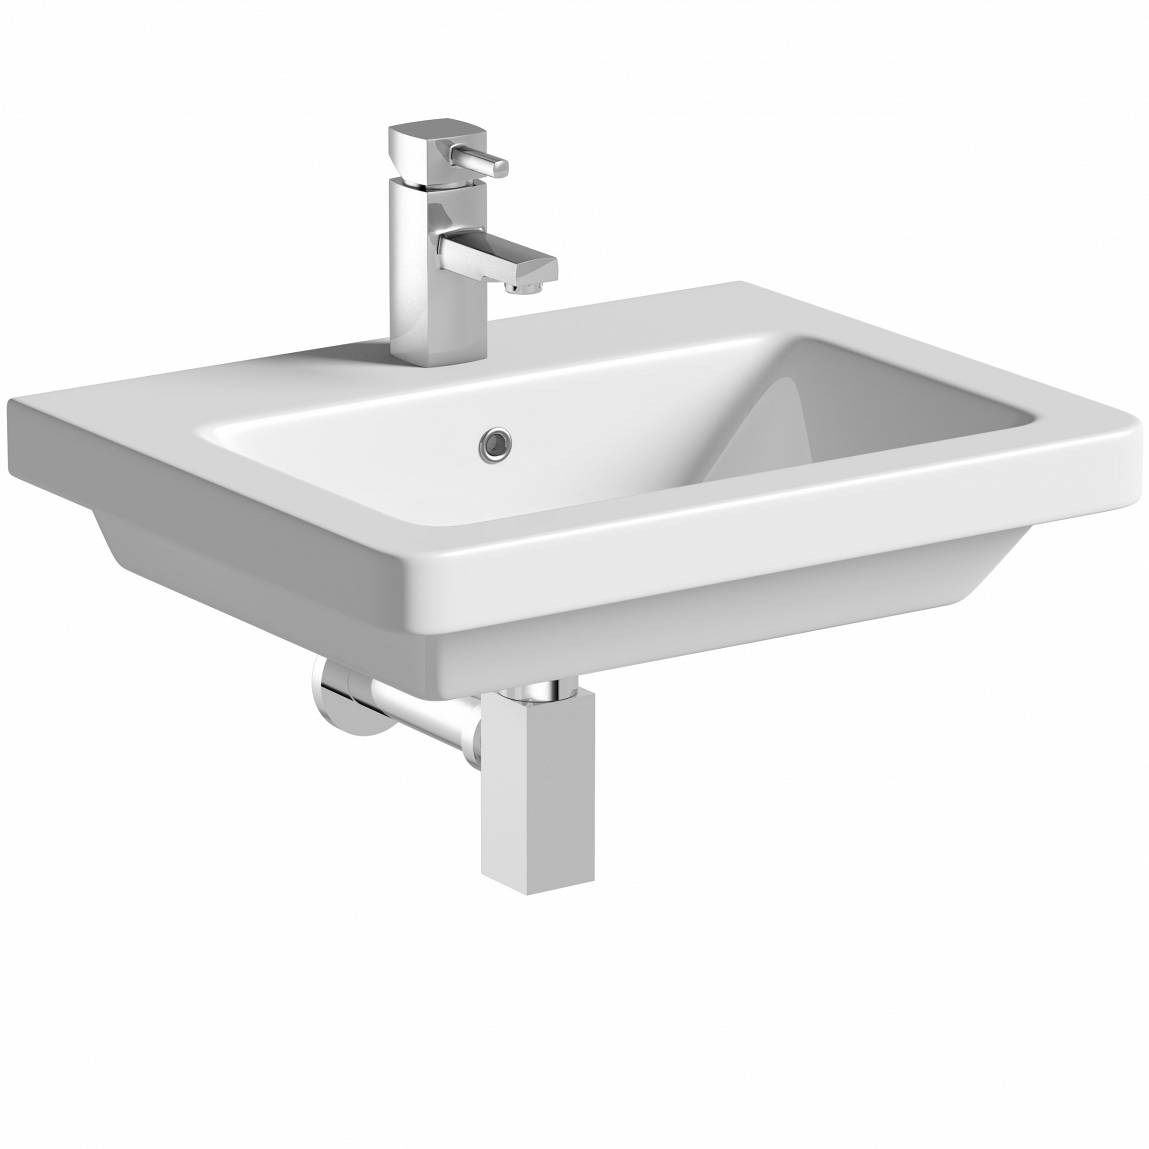 Mode Cooper 1 tap hole wall hung basin 550mm